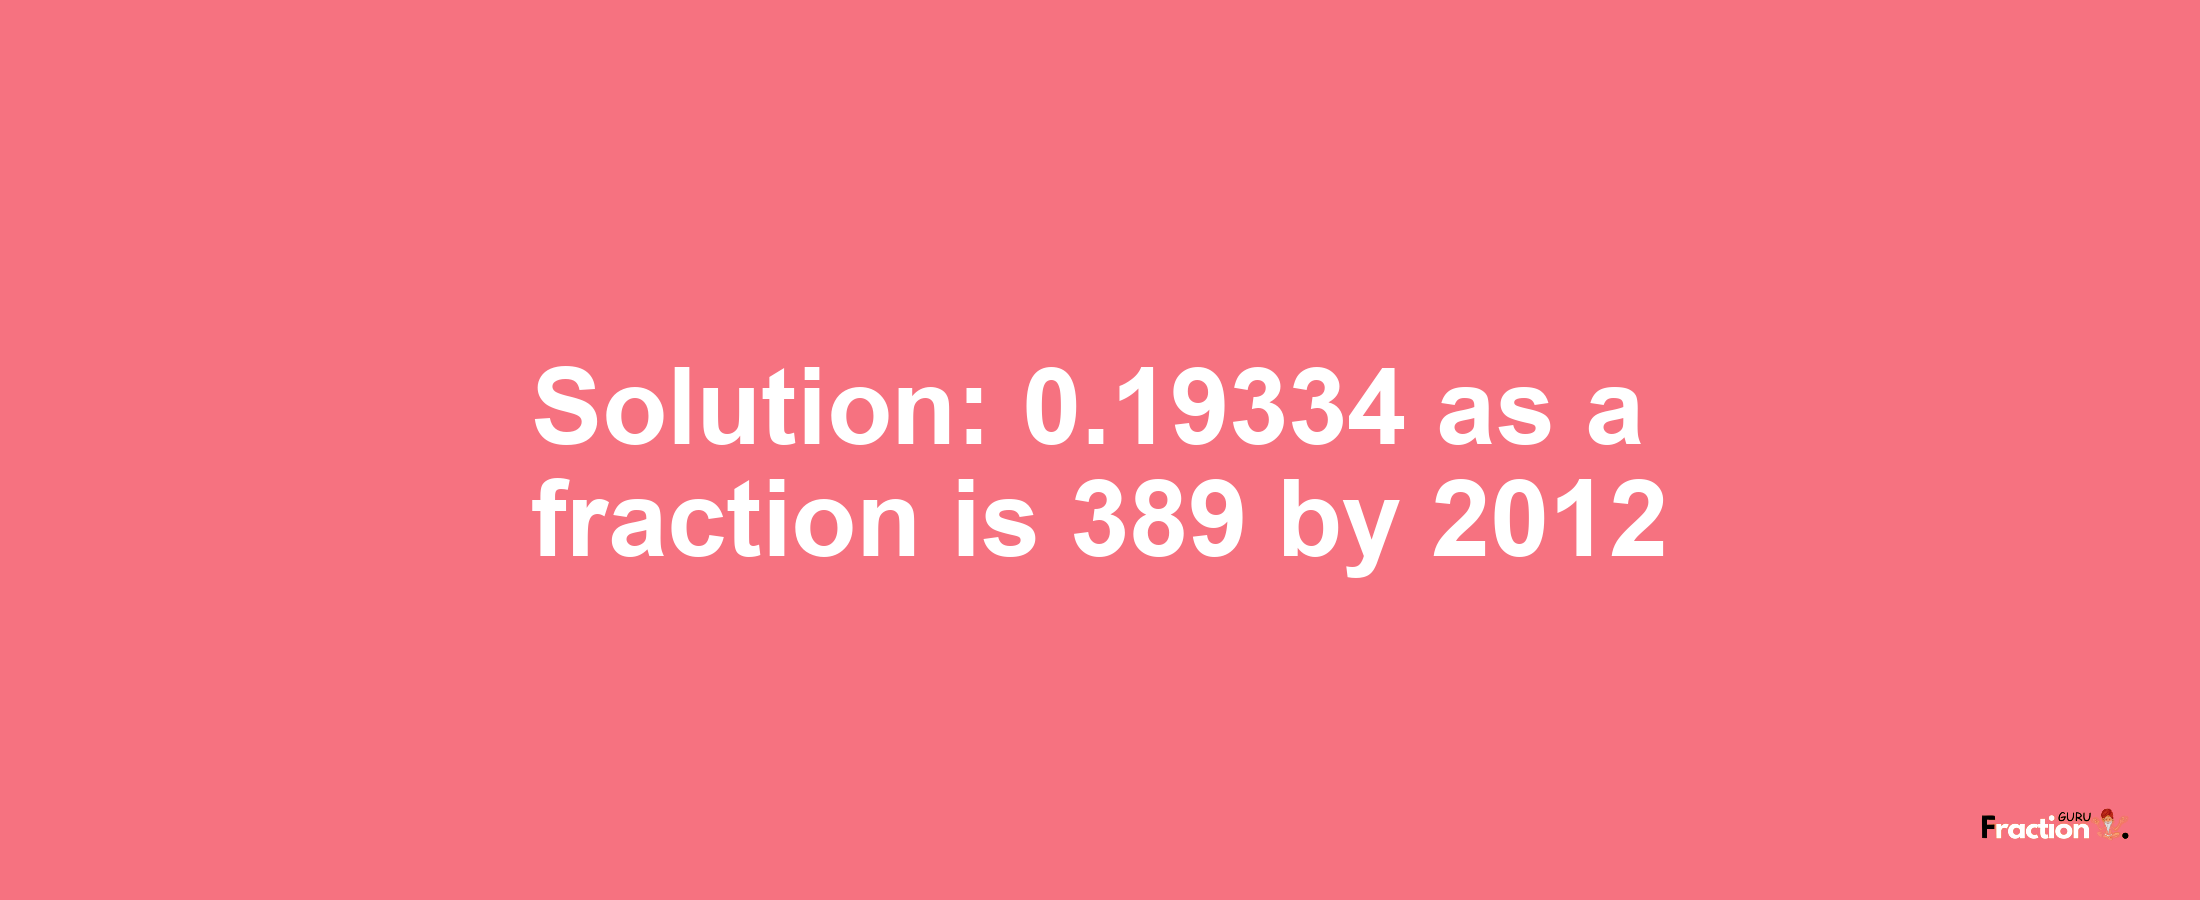 Solution:0.19334 as a fraction is 389/2012